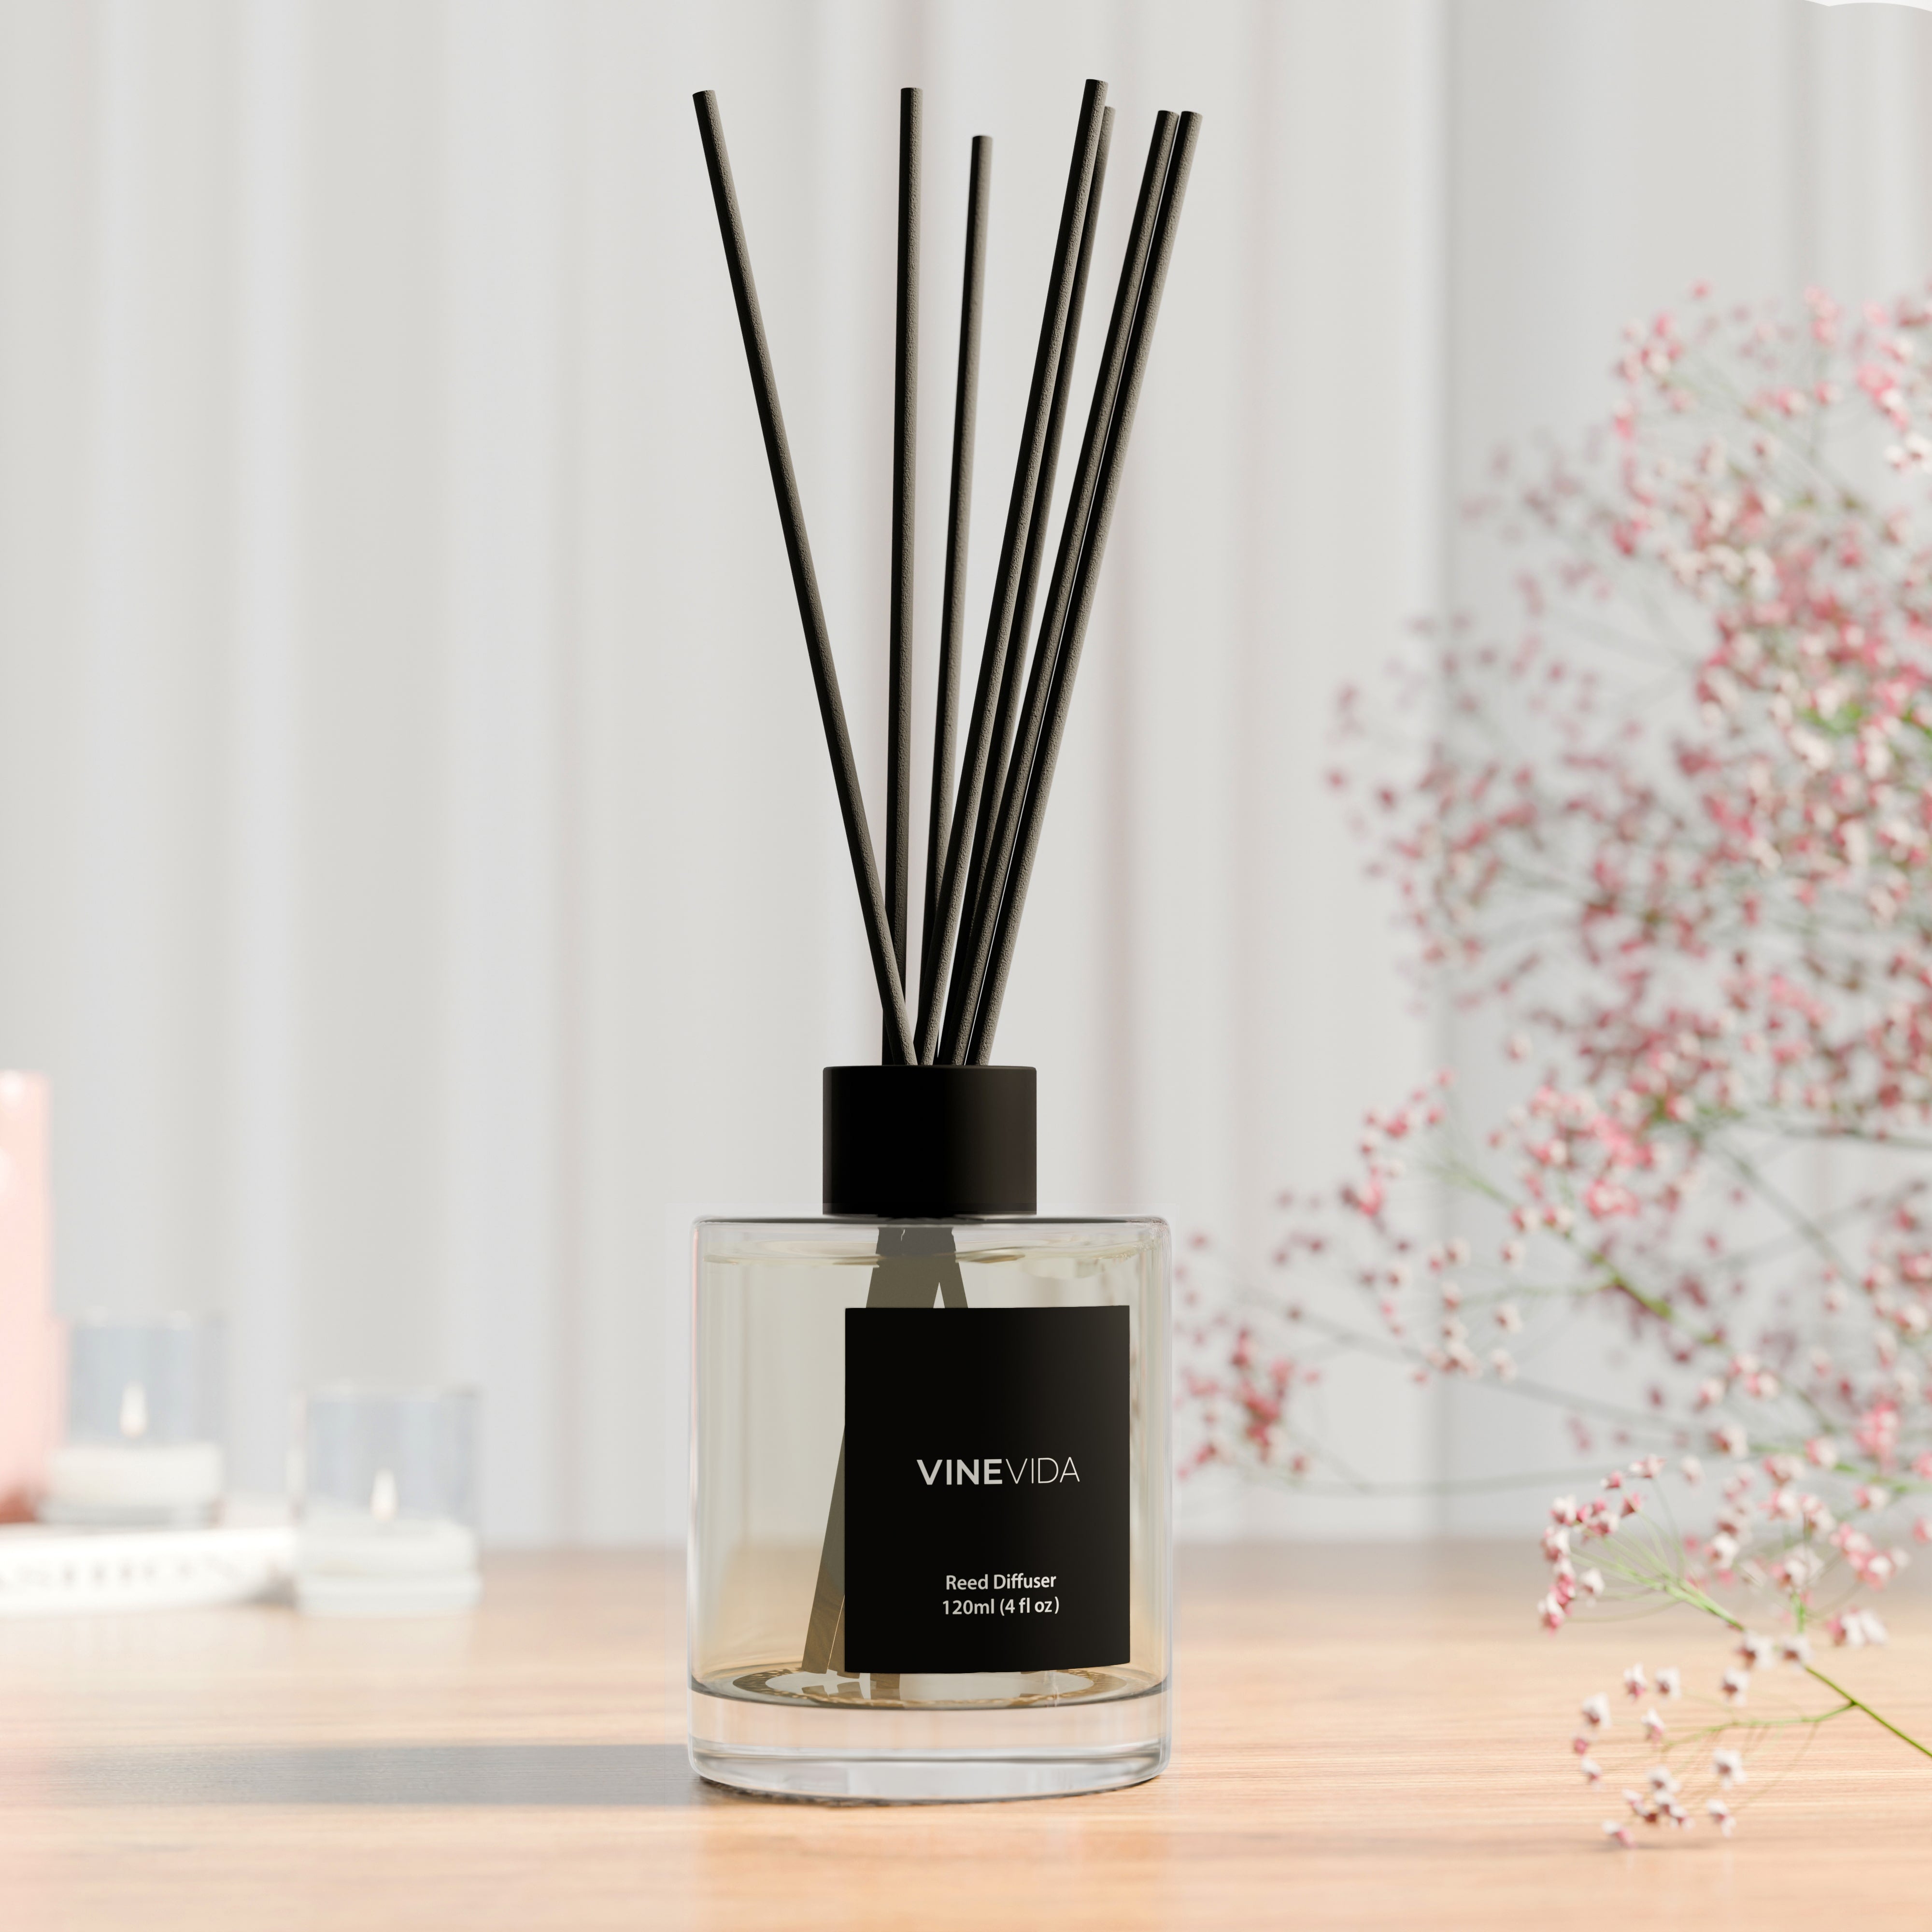 NO. 1111 Reed Diffuser - Inspired by: Endless Weekend by Bath & Body Works